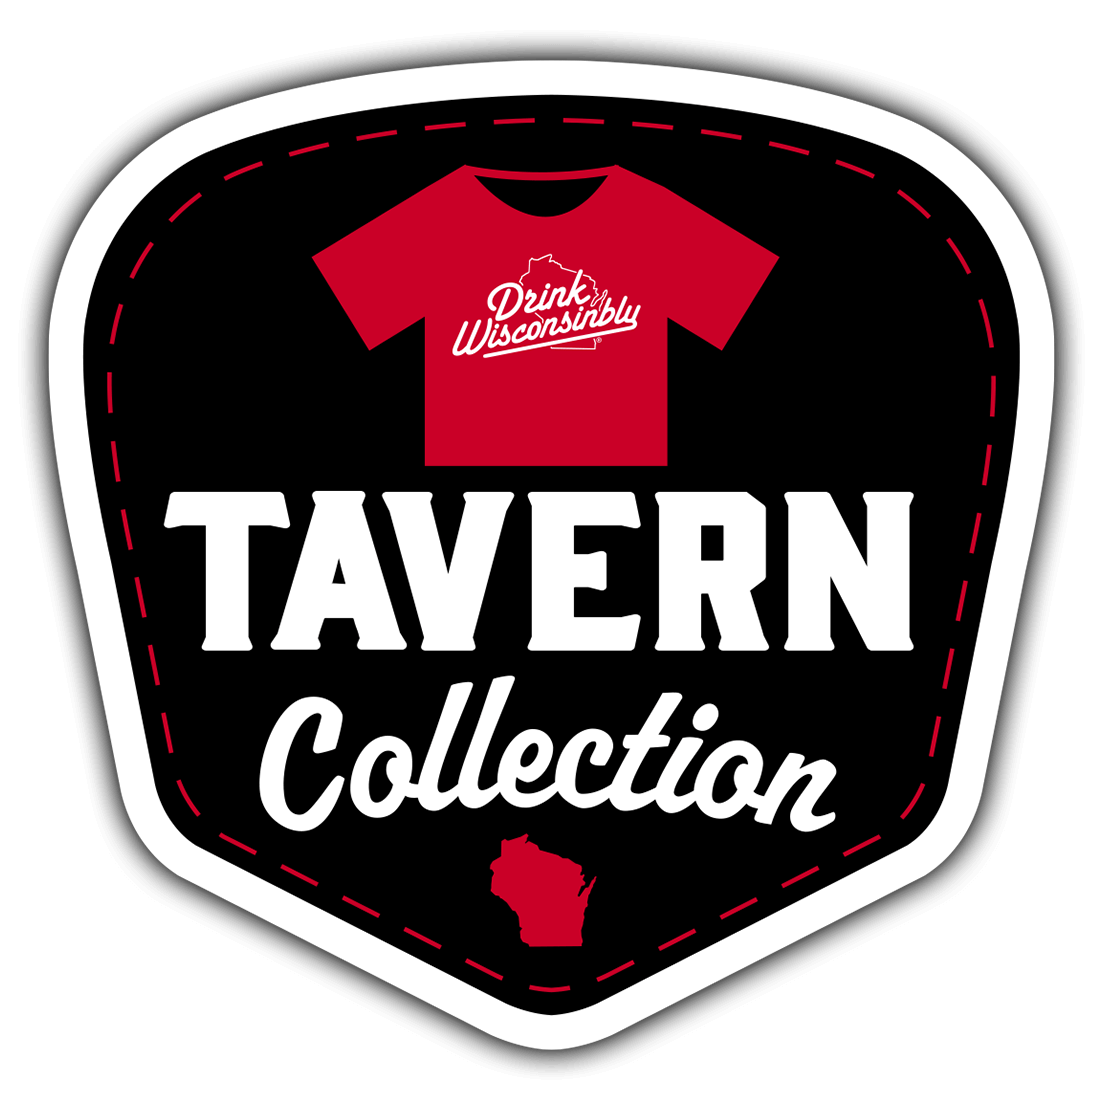 Drink Wisconsinbly Tavern Collection